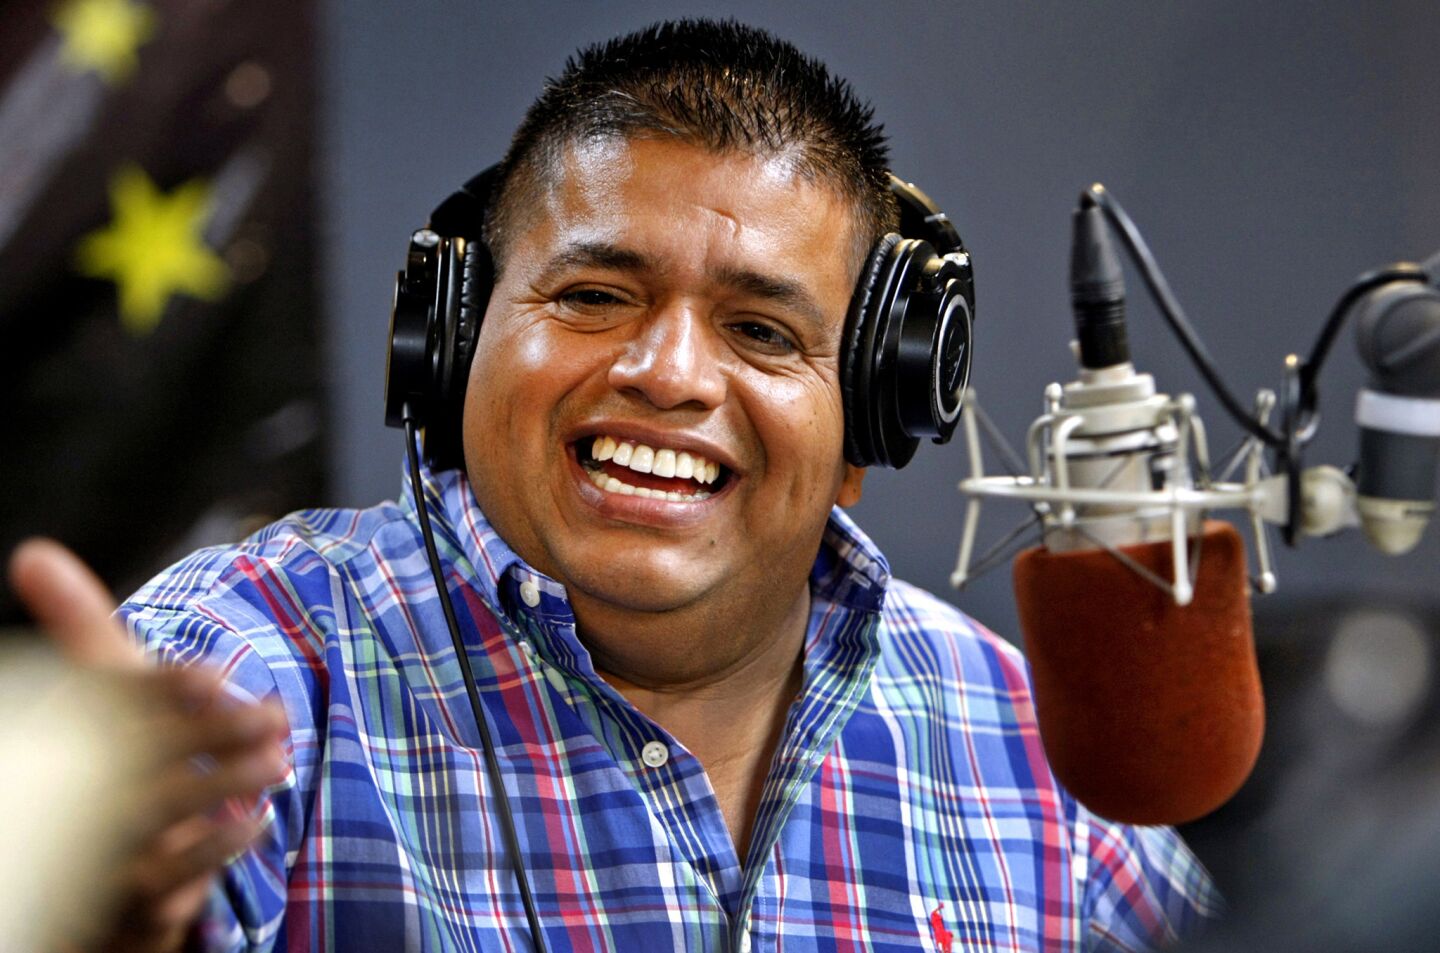 Ricardo "El Mandril" Sanchez broke into radio at the bottom: as a janitor. Then he became an ad salesman, and when an announcer didn't show up to record a commercial, Sanchez filled in. Soon, he became a radio host, gaining a measure of fame at a station in Tijuana.